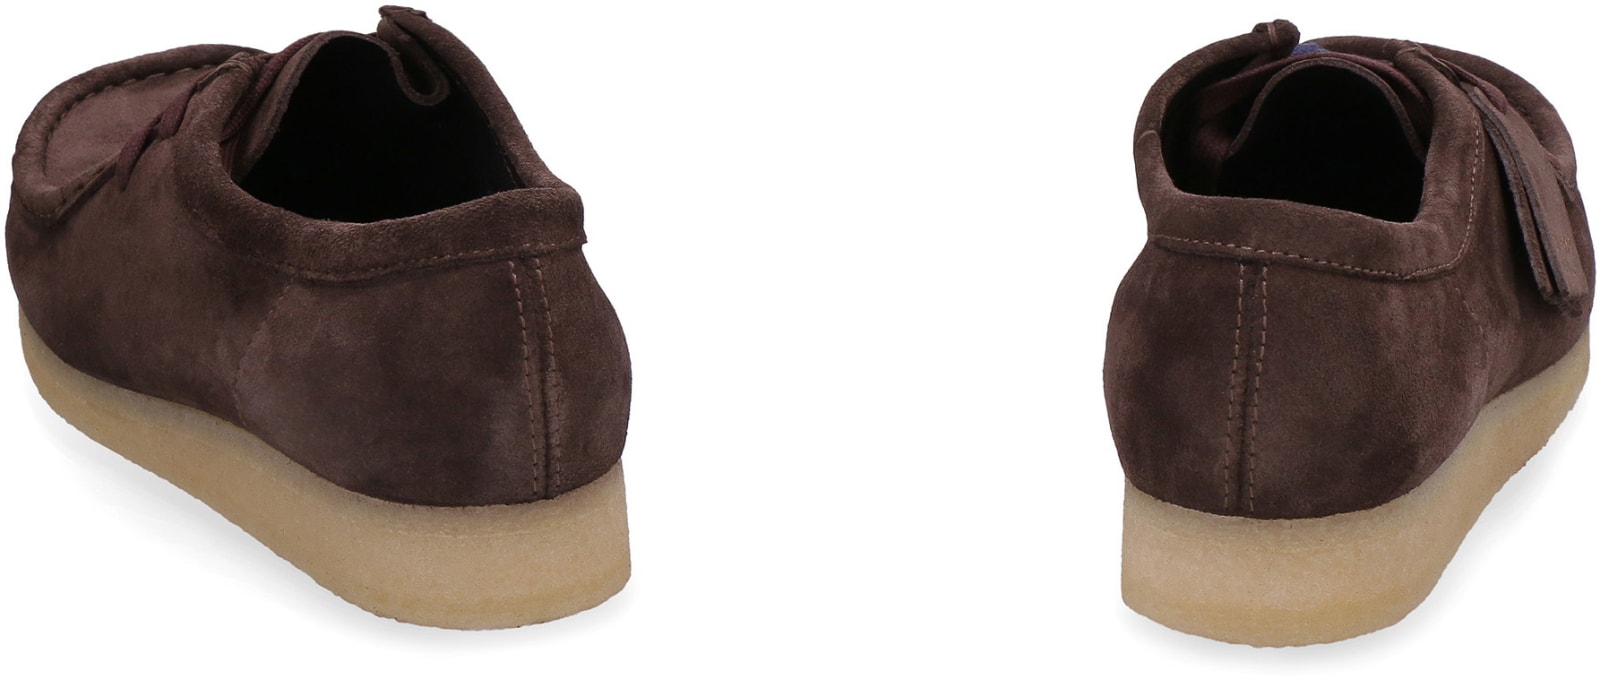 Shop Clarks Wallabee Suede Lace-up Shoes In Brown